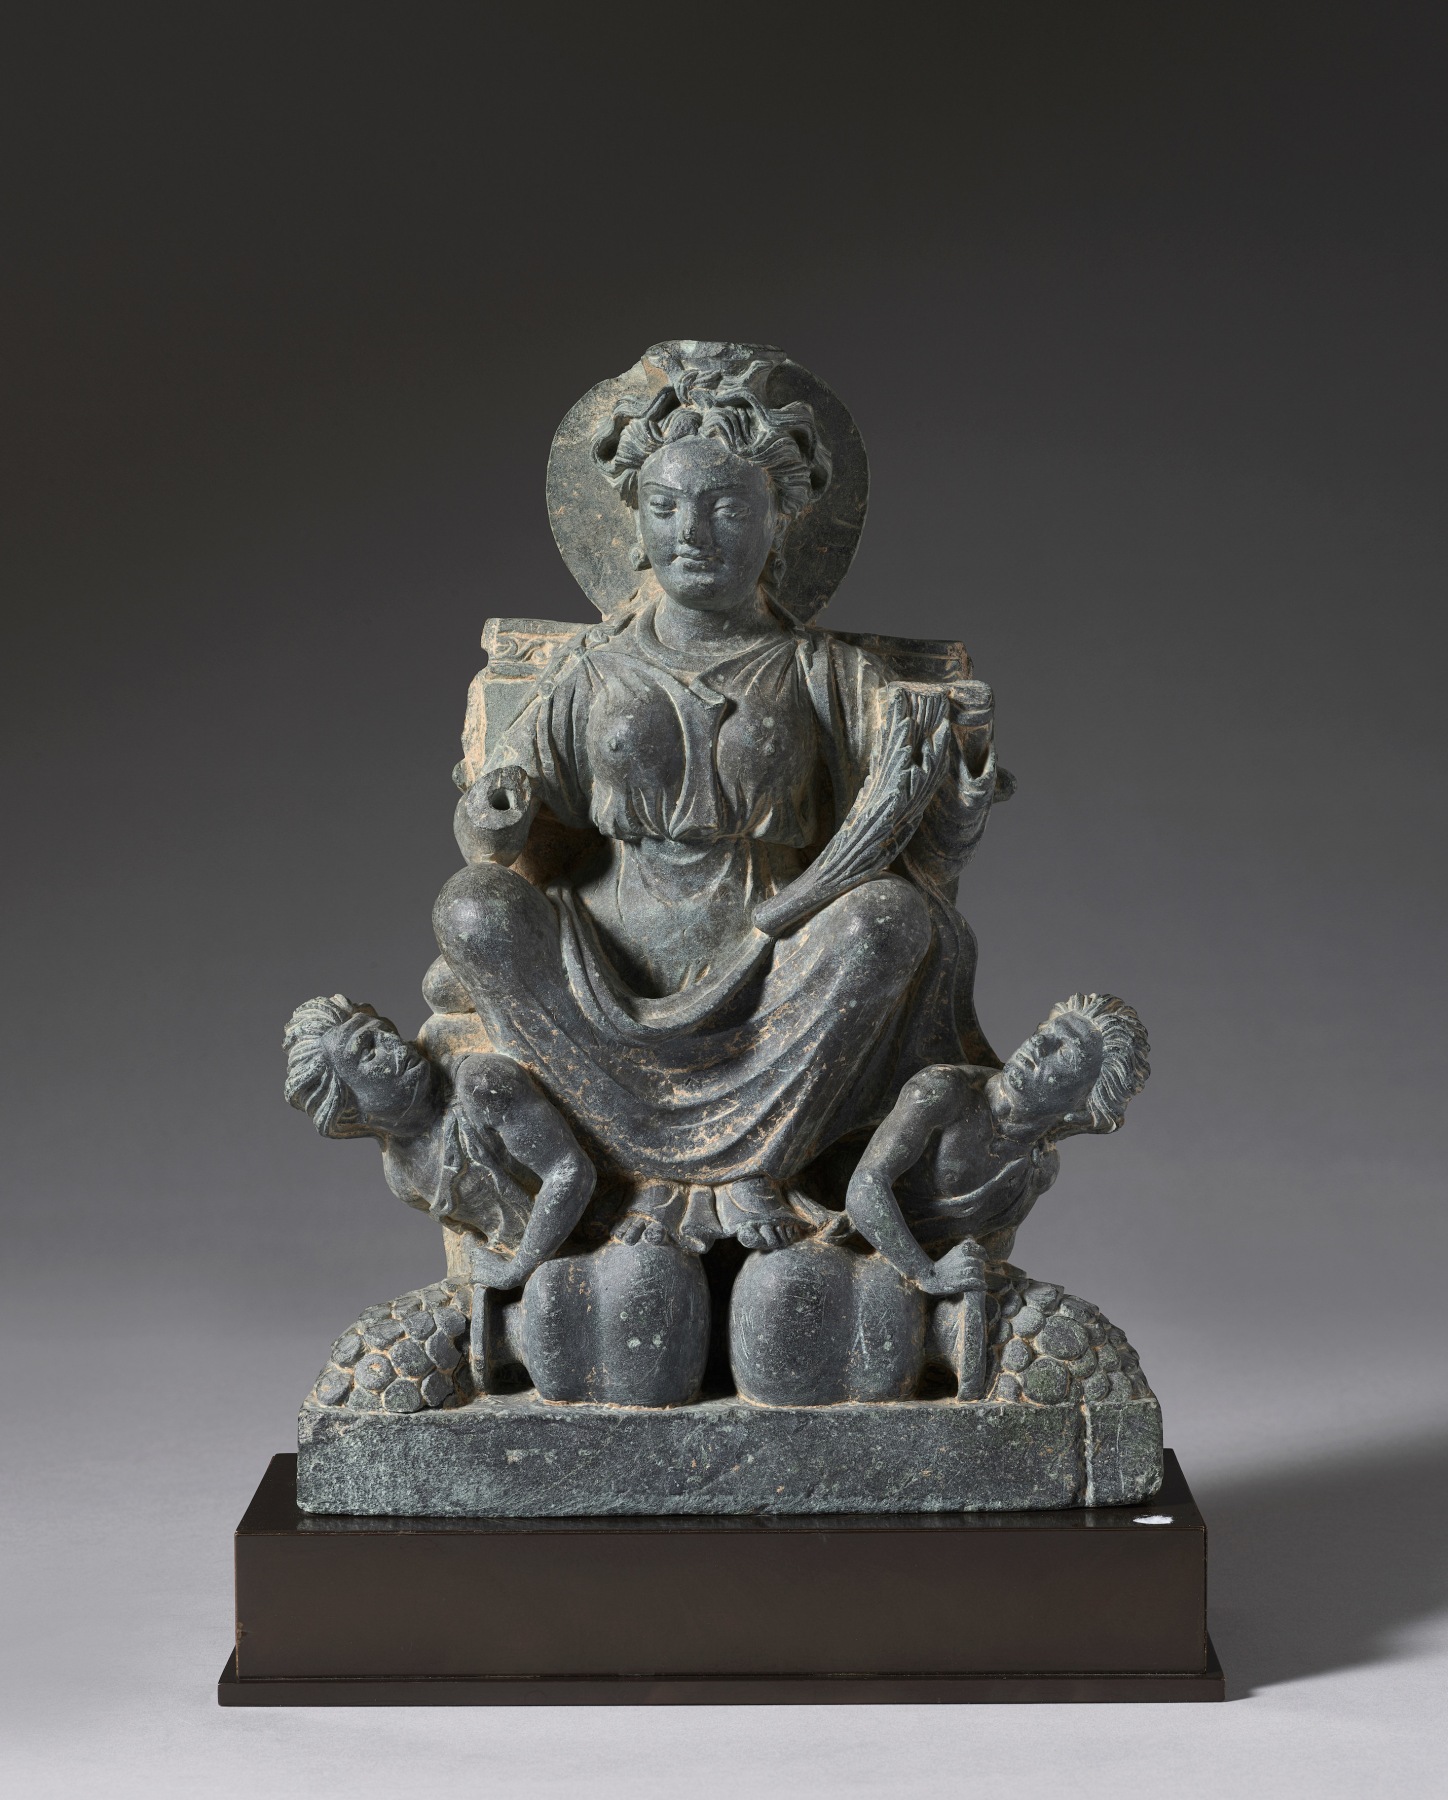 The goddess of abundance and fertility is seated on a throne with her feet resting on two overturned pots. 